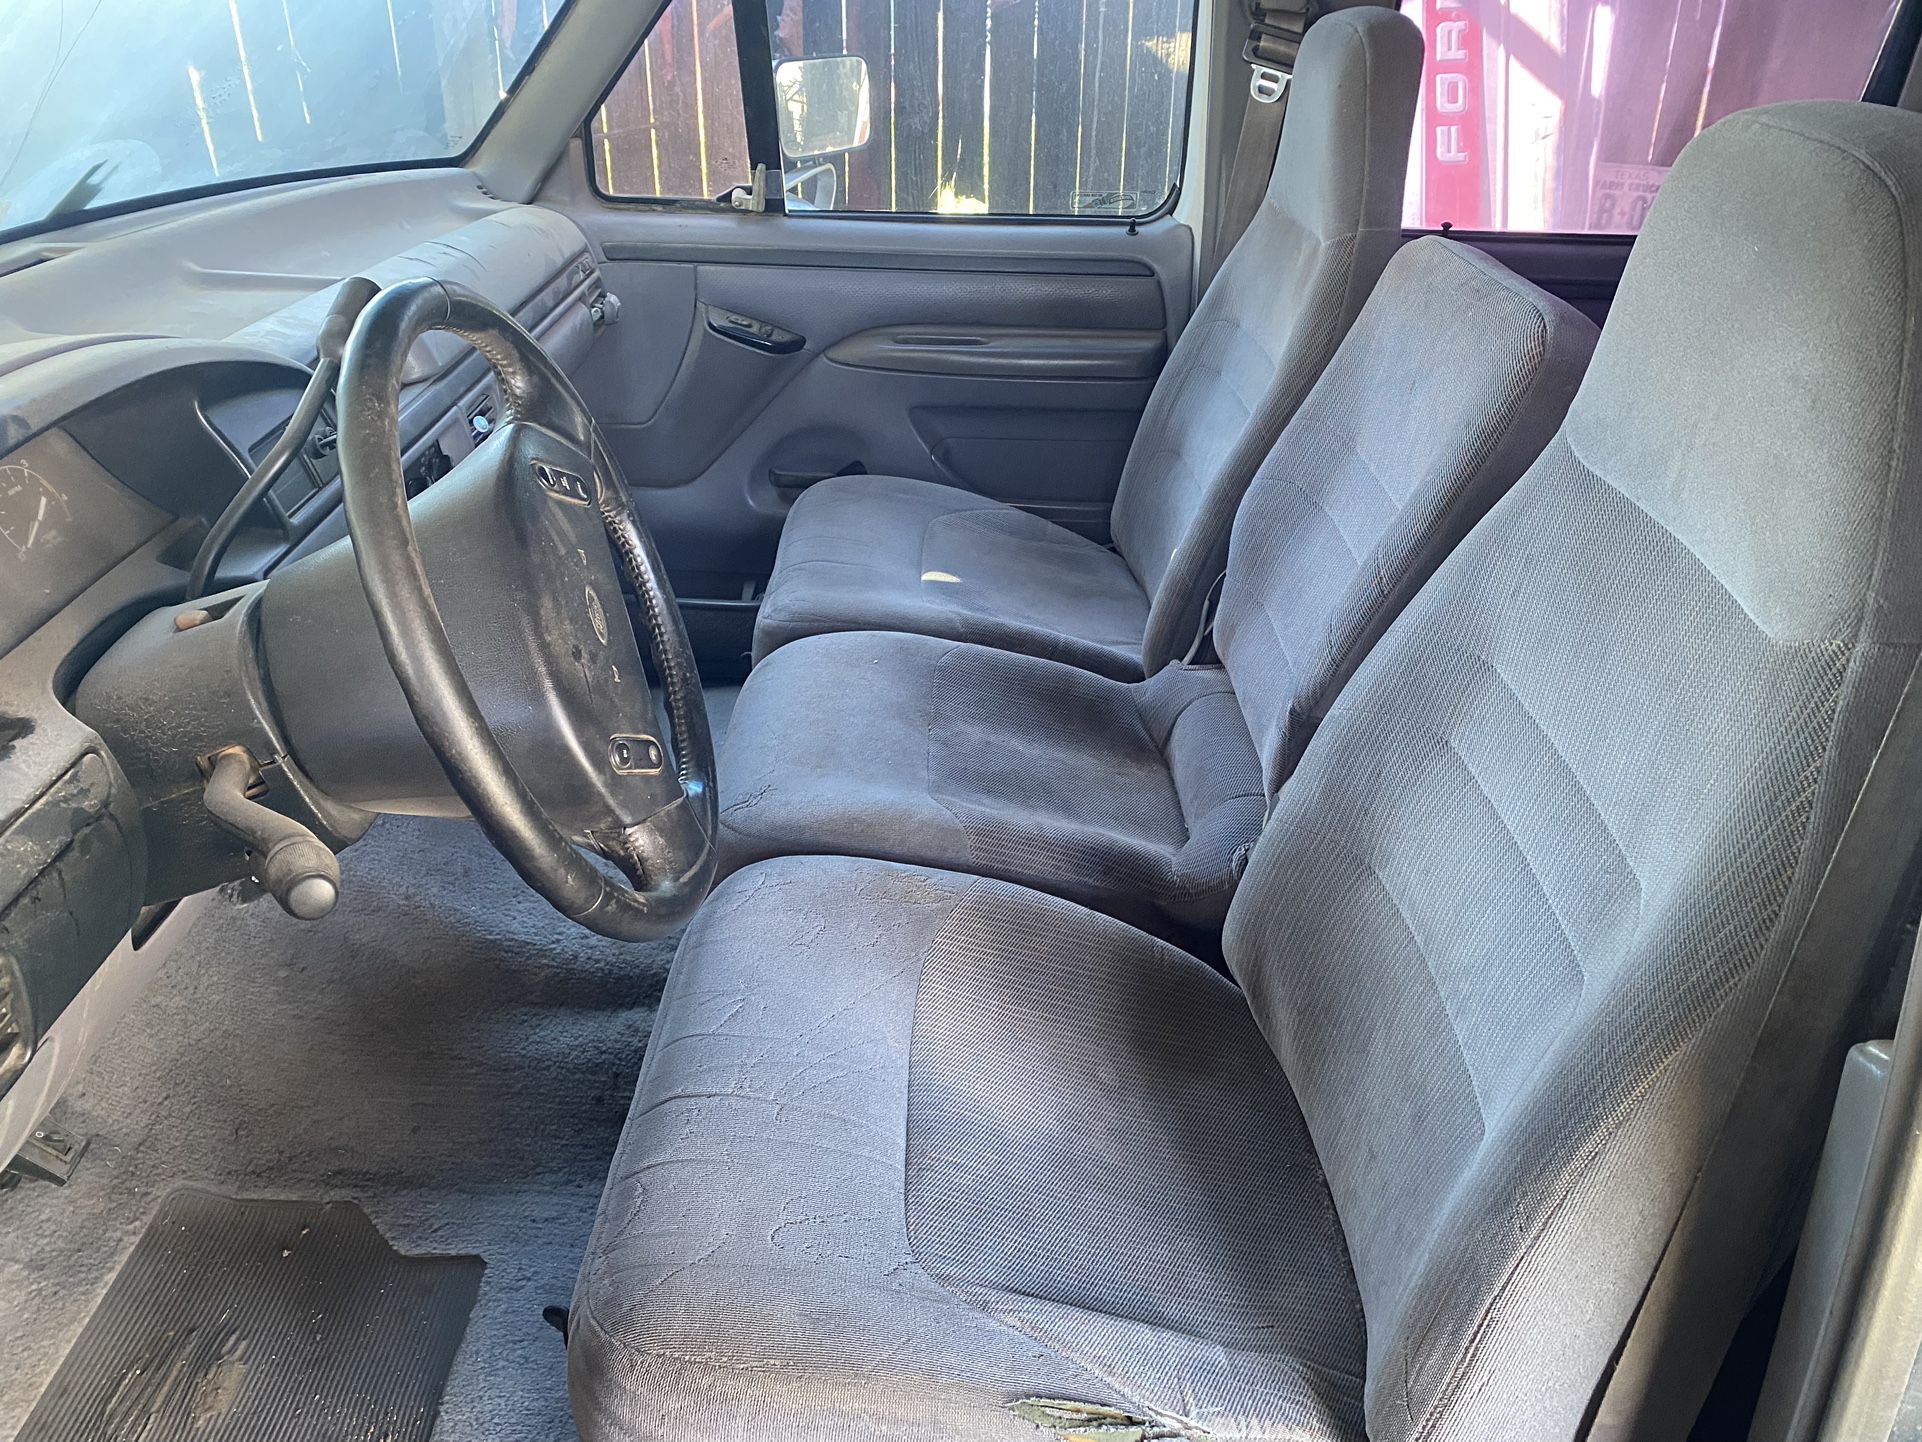 1995 F150 Front Seats 